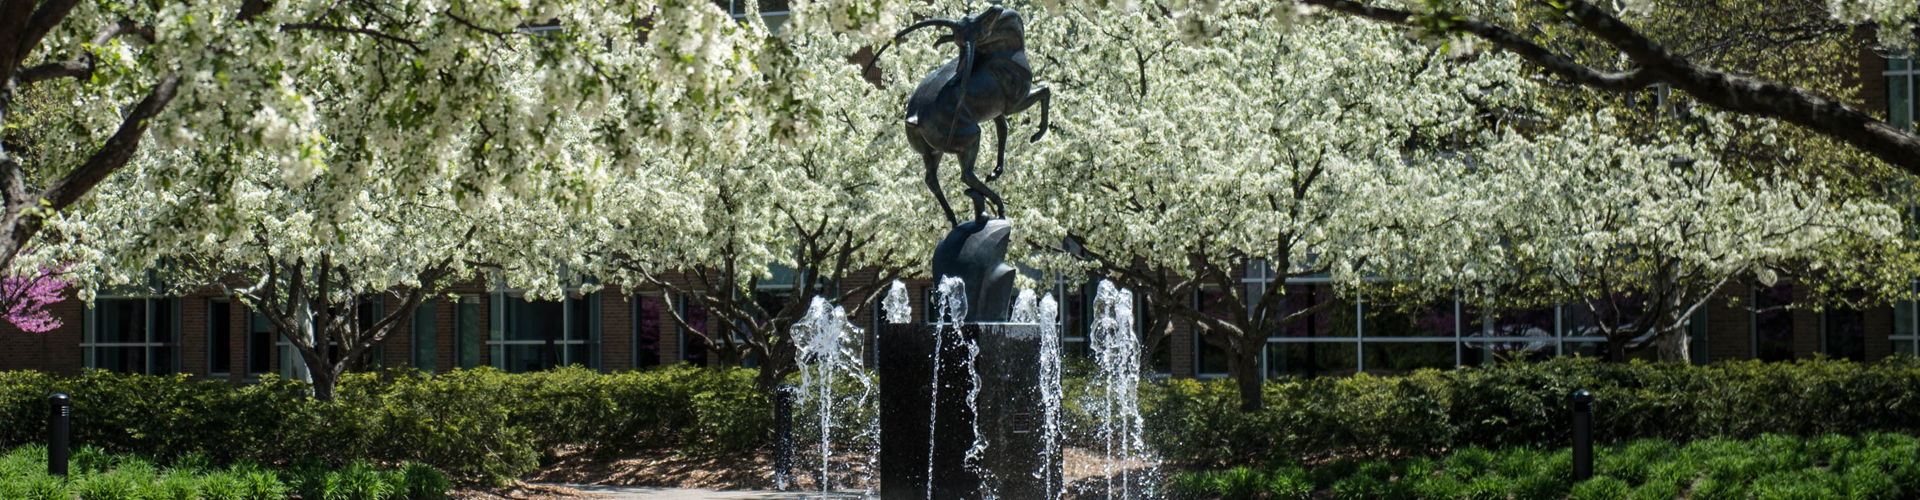 Image of the Leaping Gazelle fountain in the spring with flowering trees